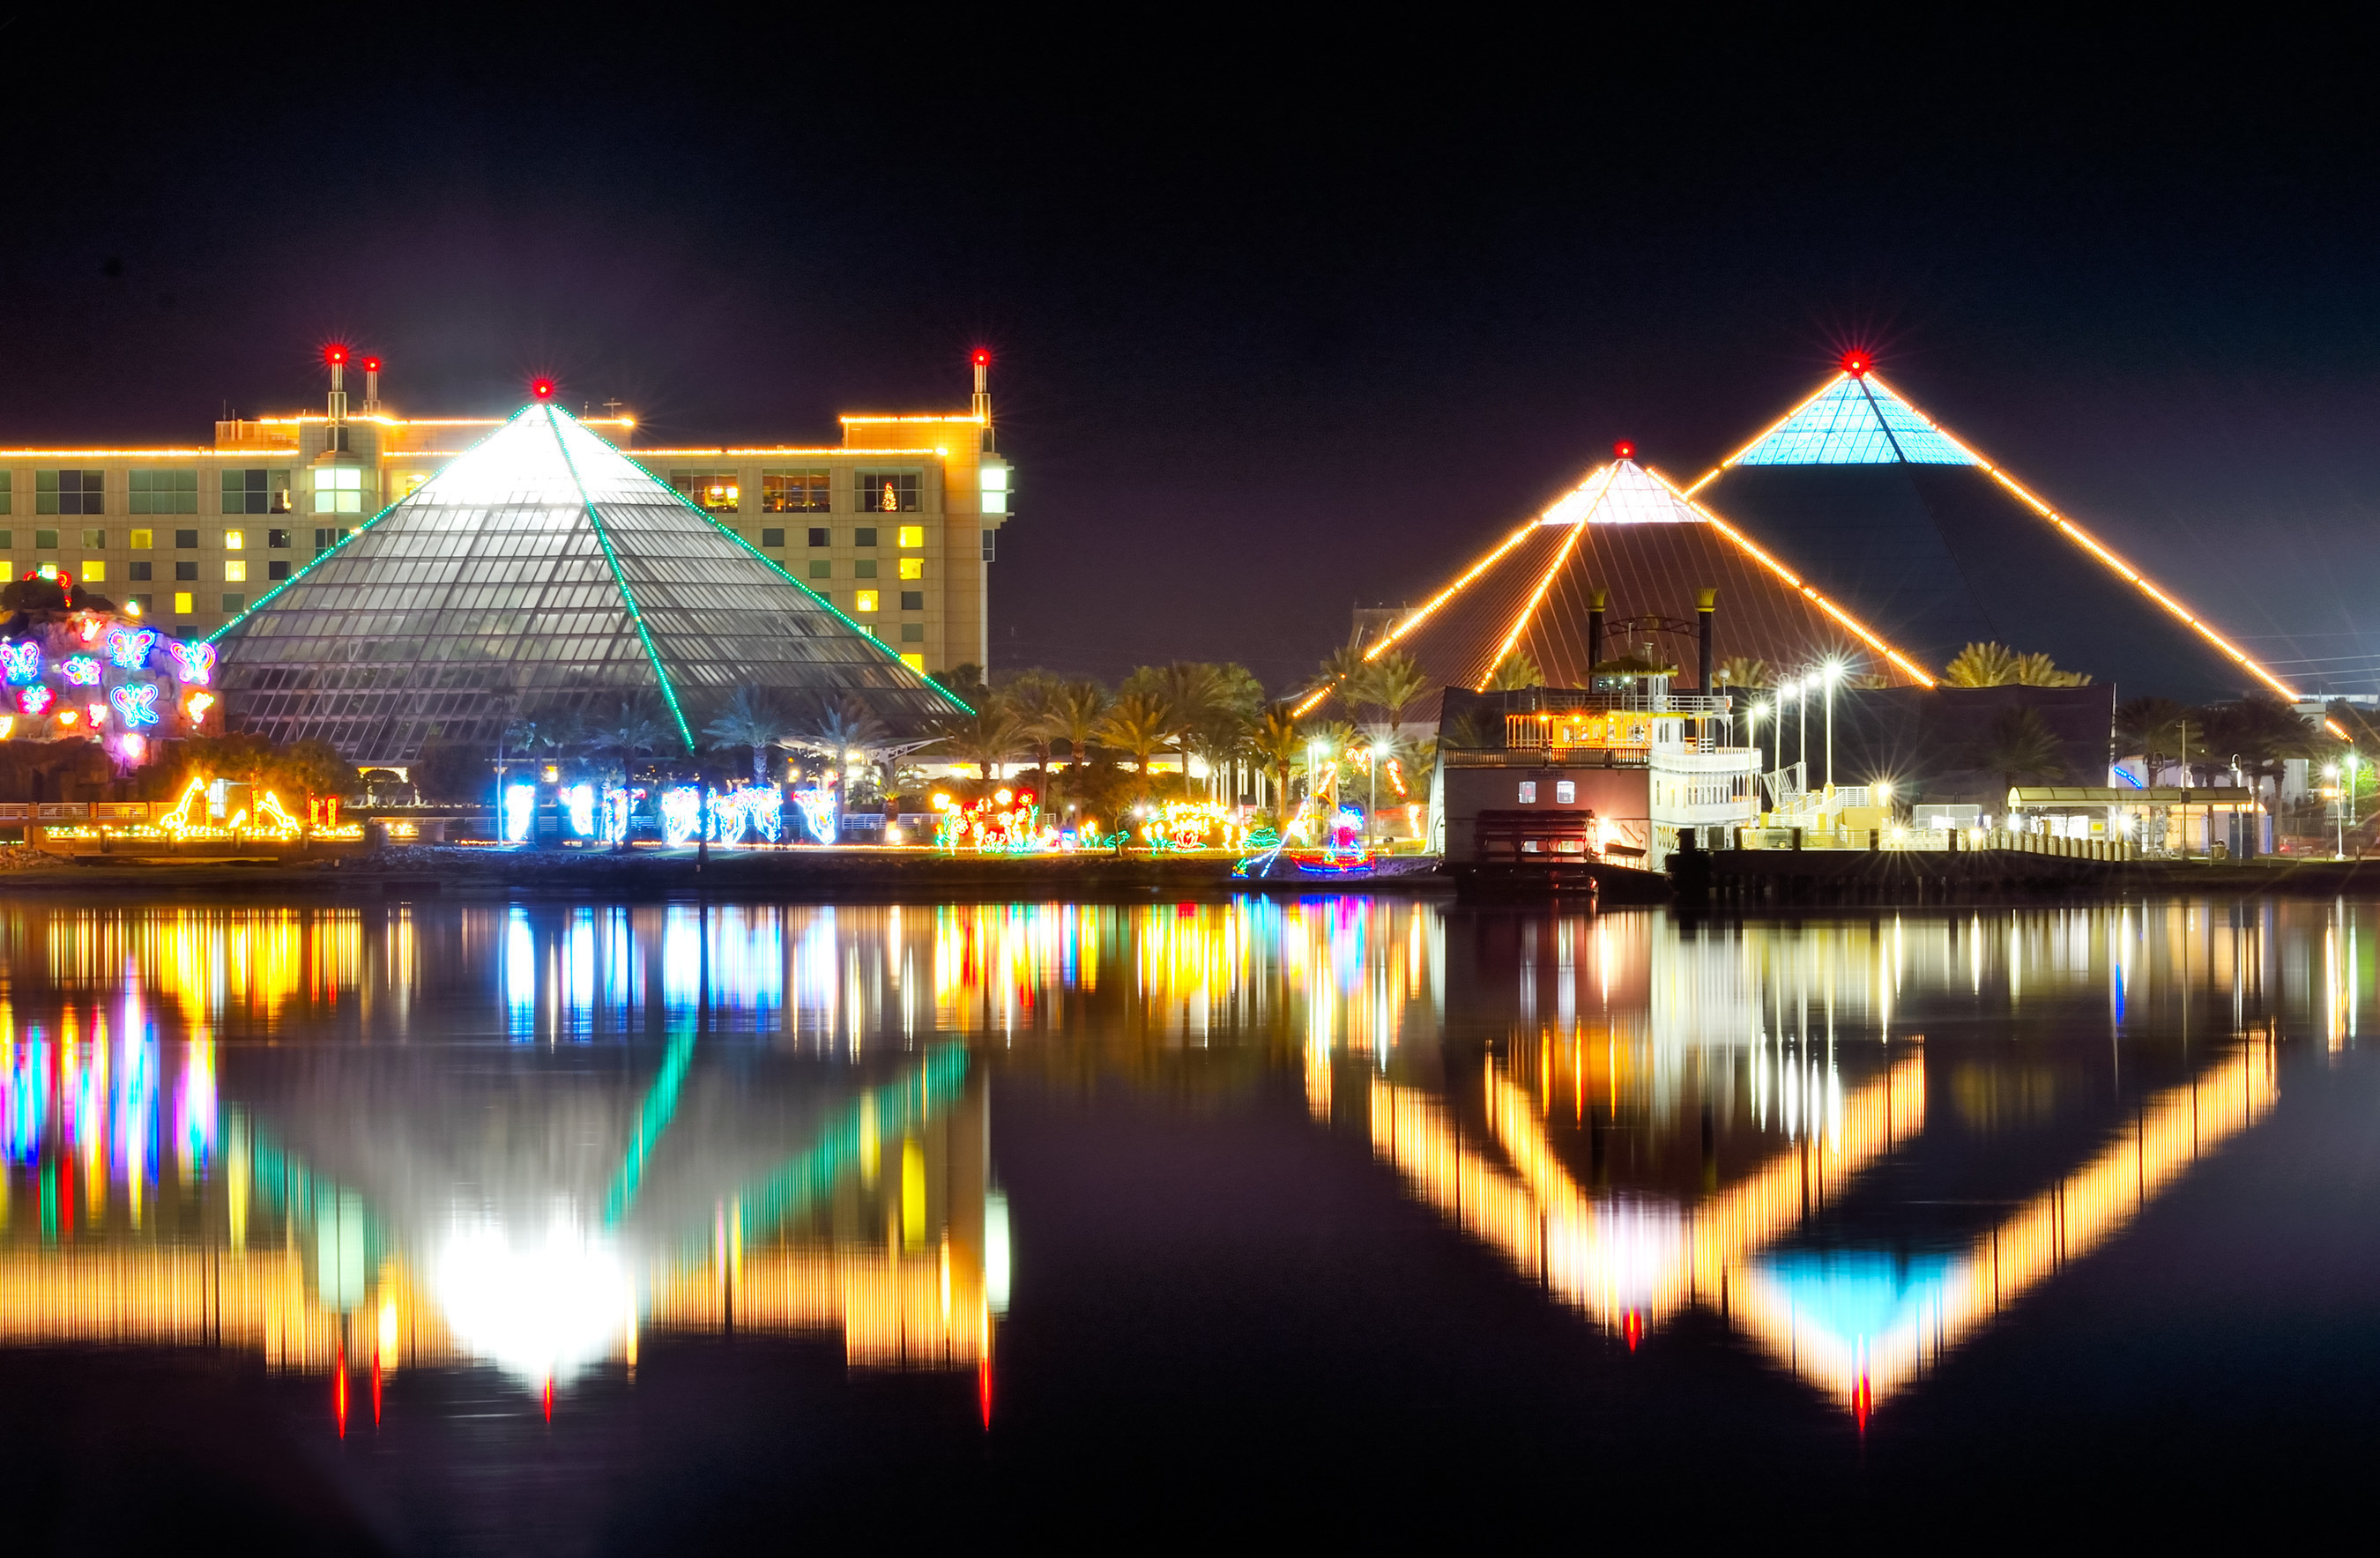 Moody Gardens in Galveston, Texas offers a unique holiday getaway. The Festival of Lights, ICE LAND Ice Sculptures, holiday films at the 3D and 4D theaters, Arctic Ice Slide, Ice Skating, spa, restaurants, spa and breathtaking views over Galveston Bay offer great fun for families and adults with enough activities to fill weekend and then some.